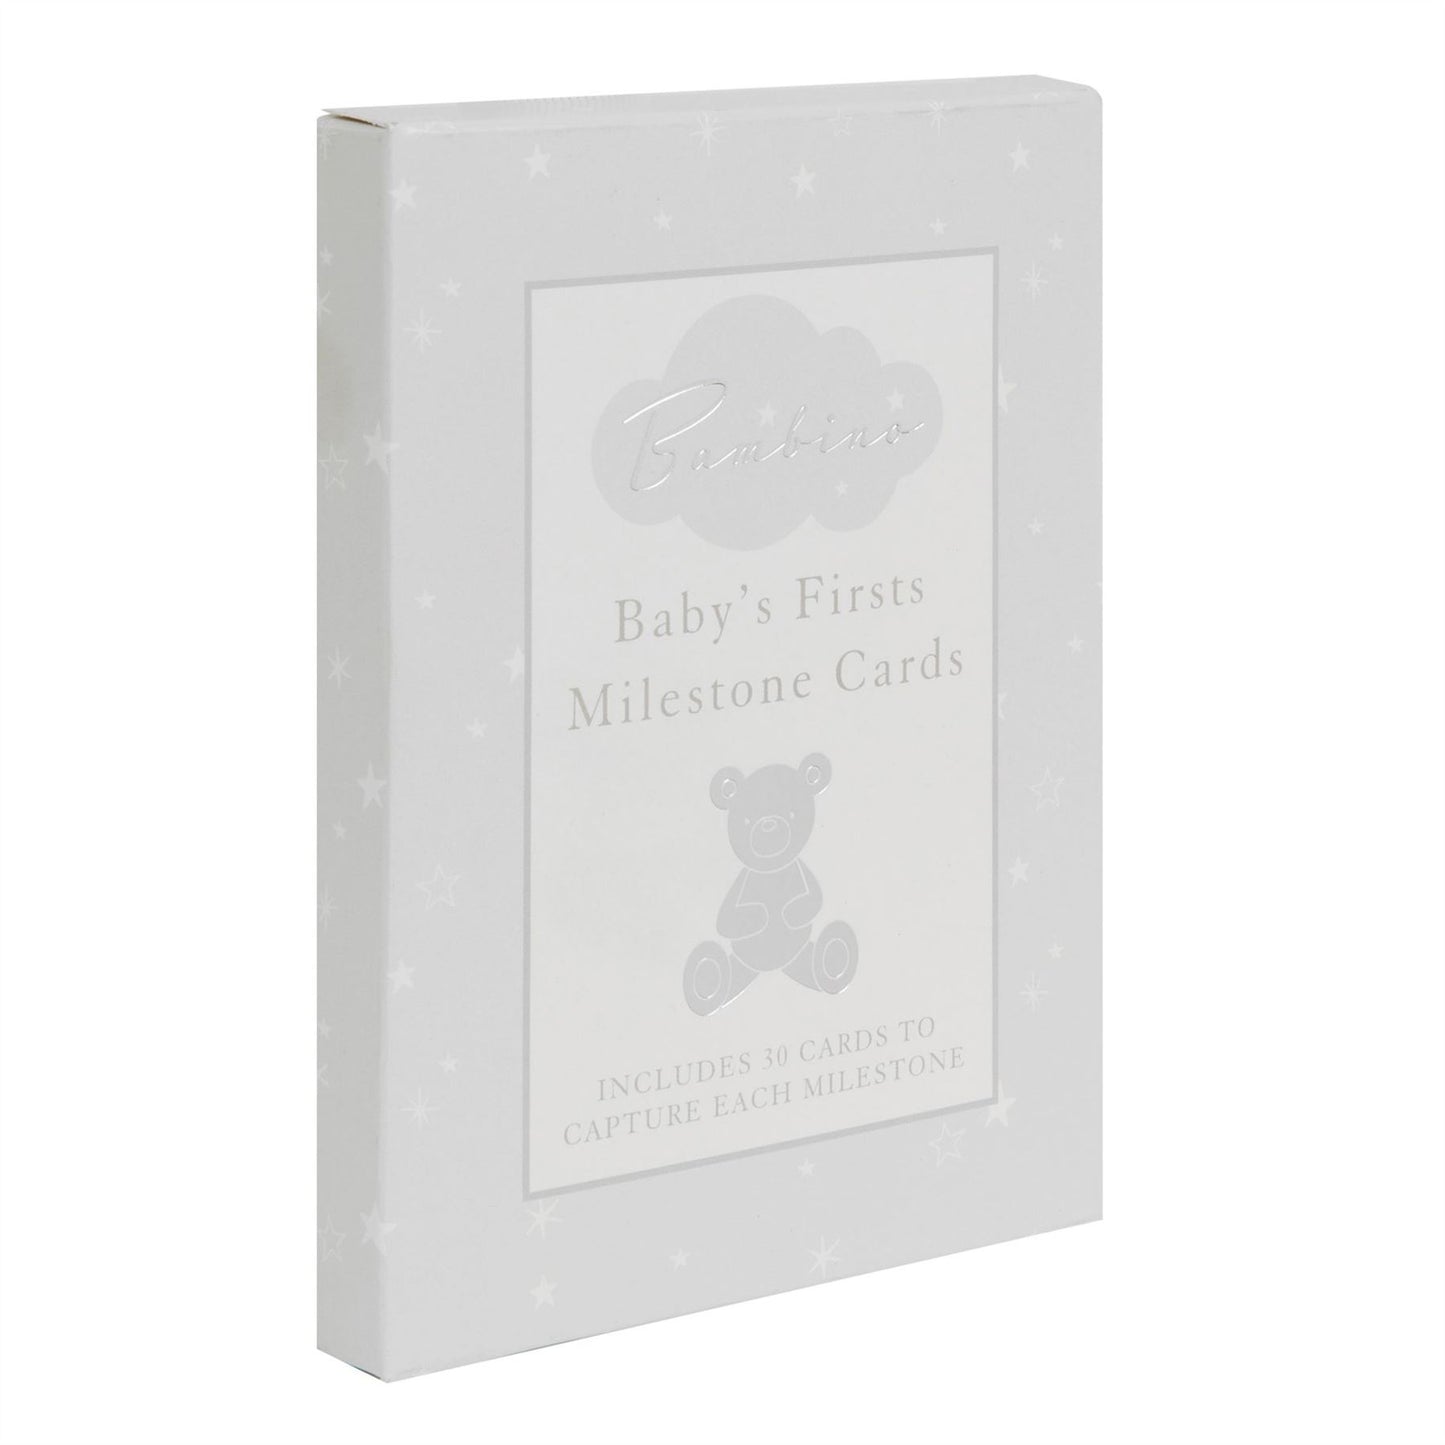 Bambino Little Star Baby Milestone Cards with foil